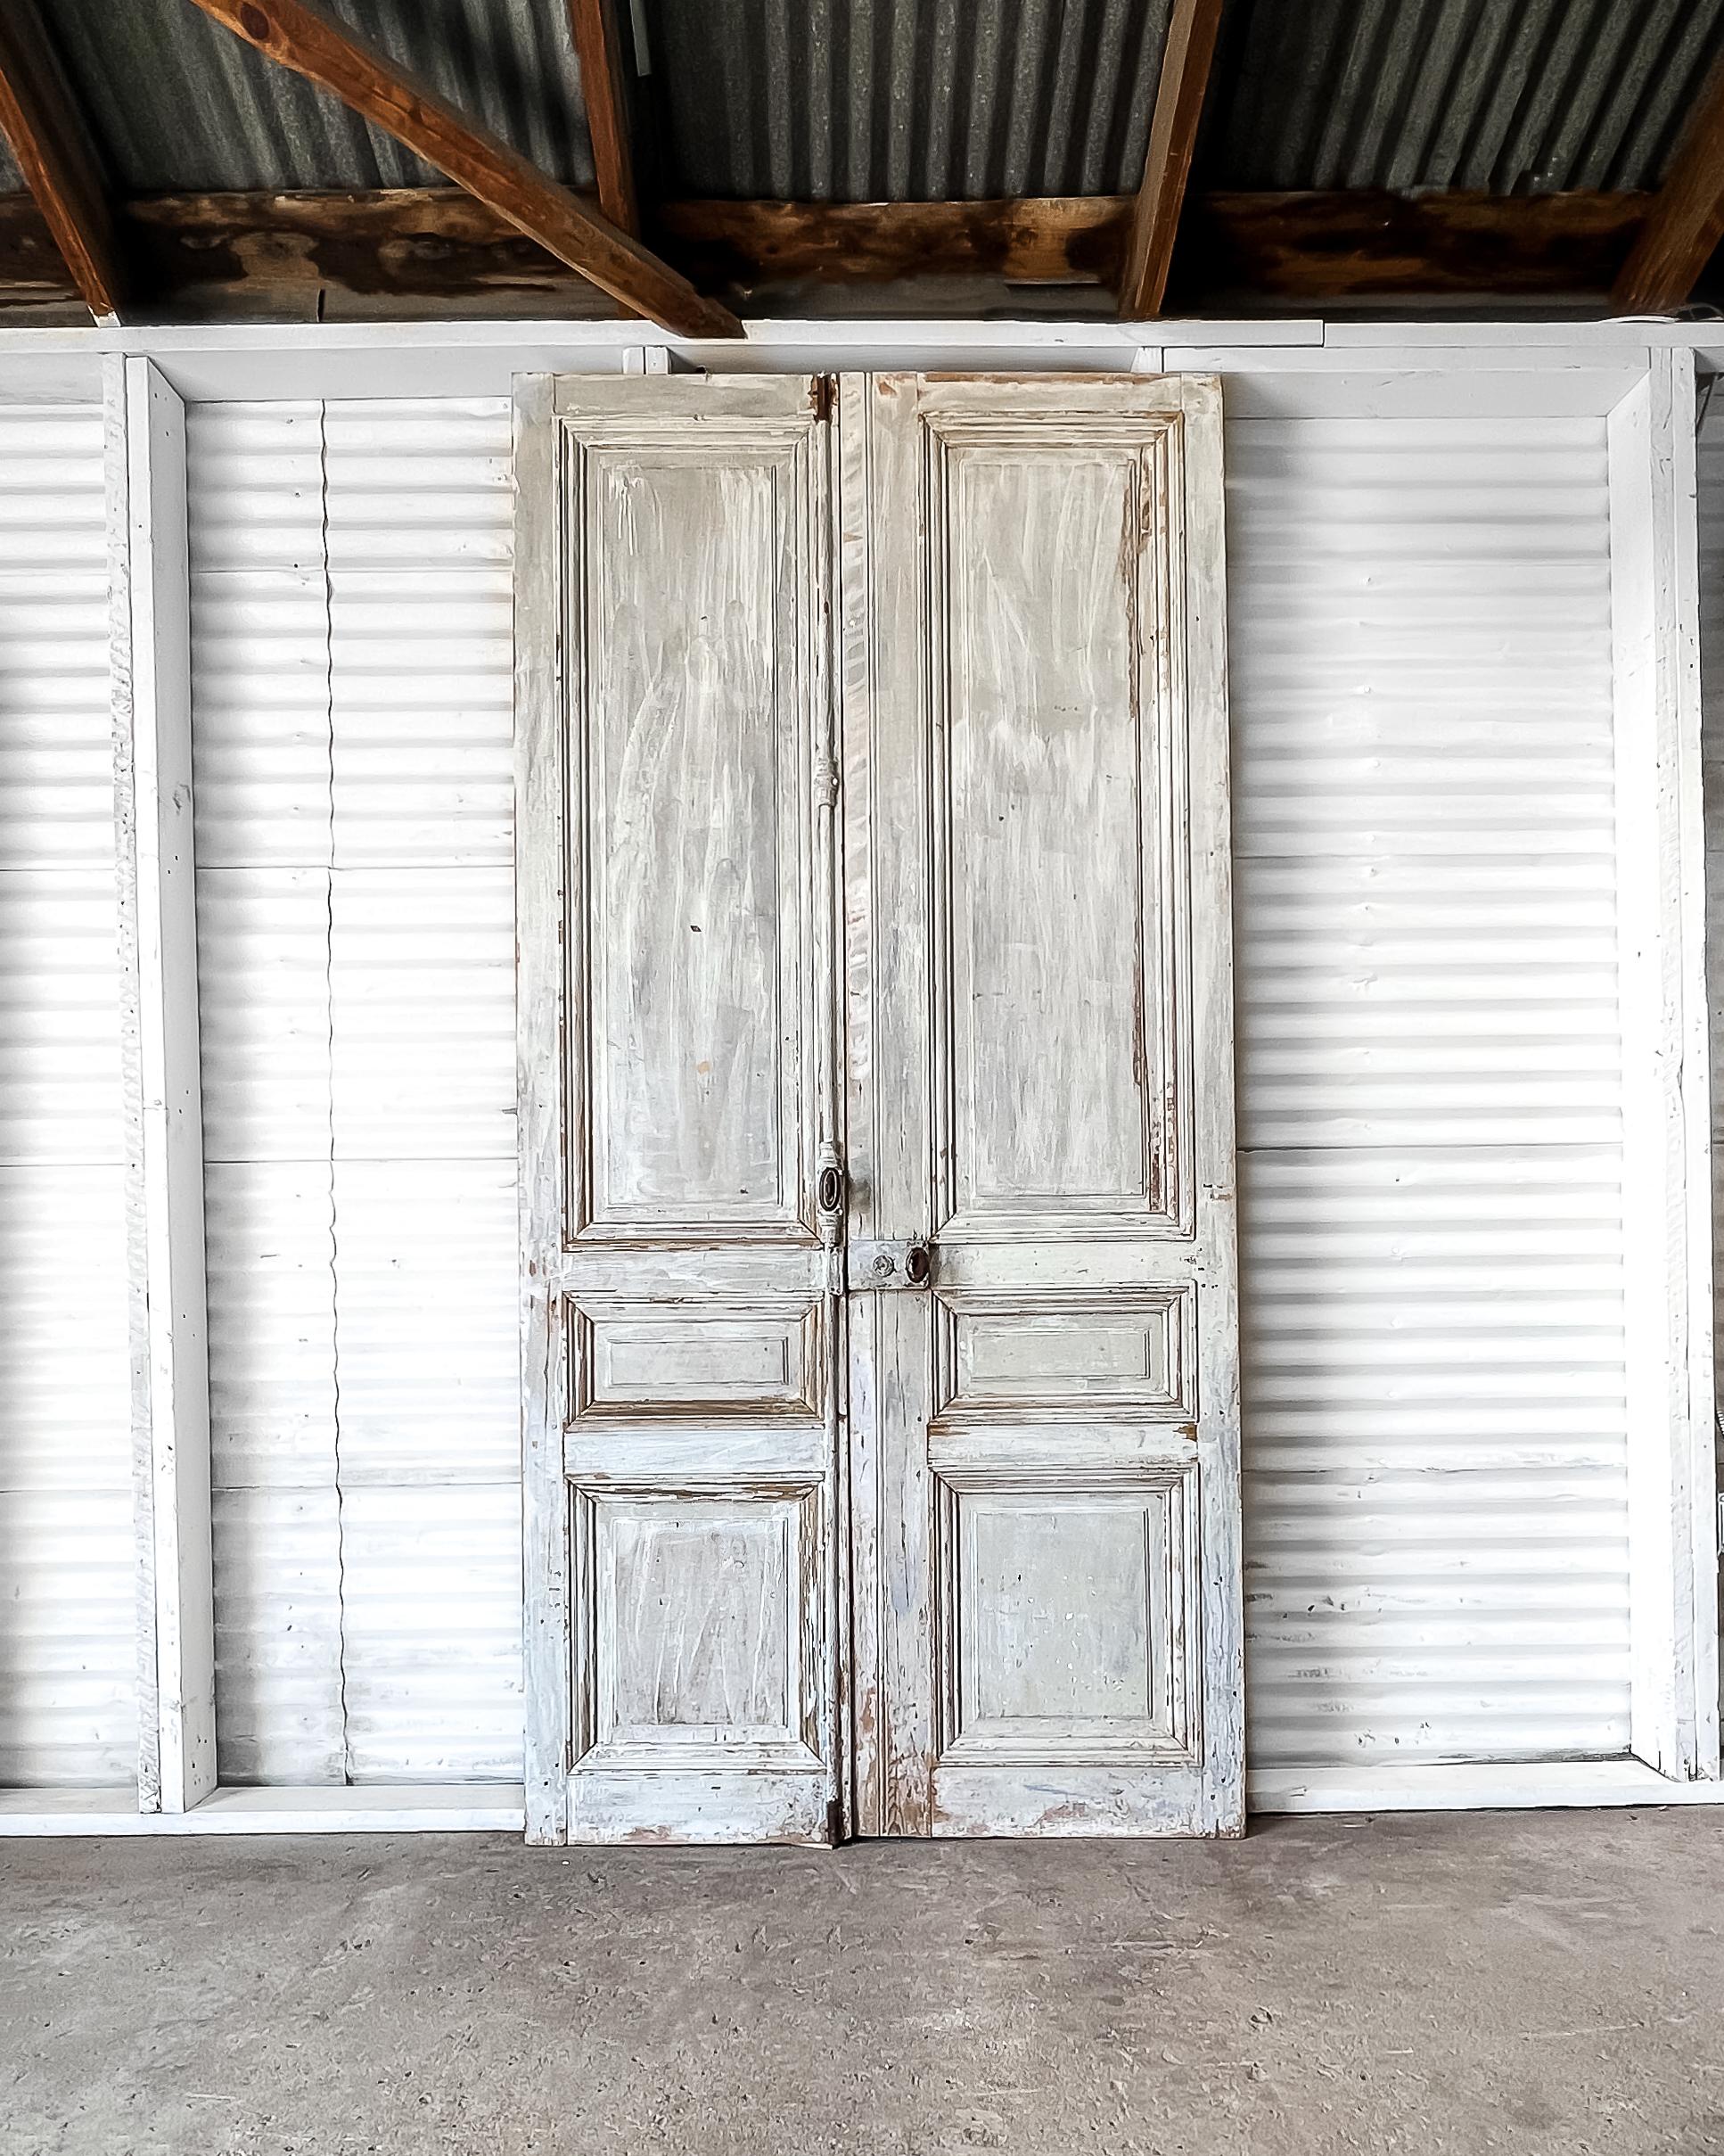 Reclaimed solid oak raised panel interior doors with a worn appearance to the original pale blue paint. Once gracing a beautiful French home, these doors will add character and old-world charm to your modern home.

Salvaged in France, circa